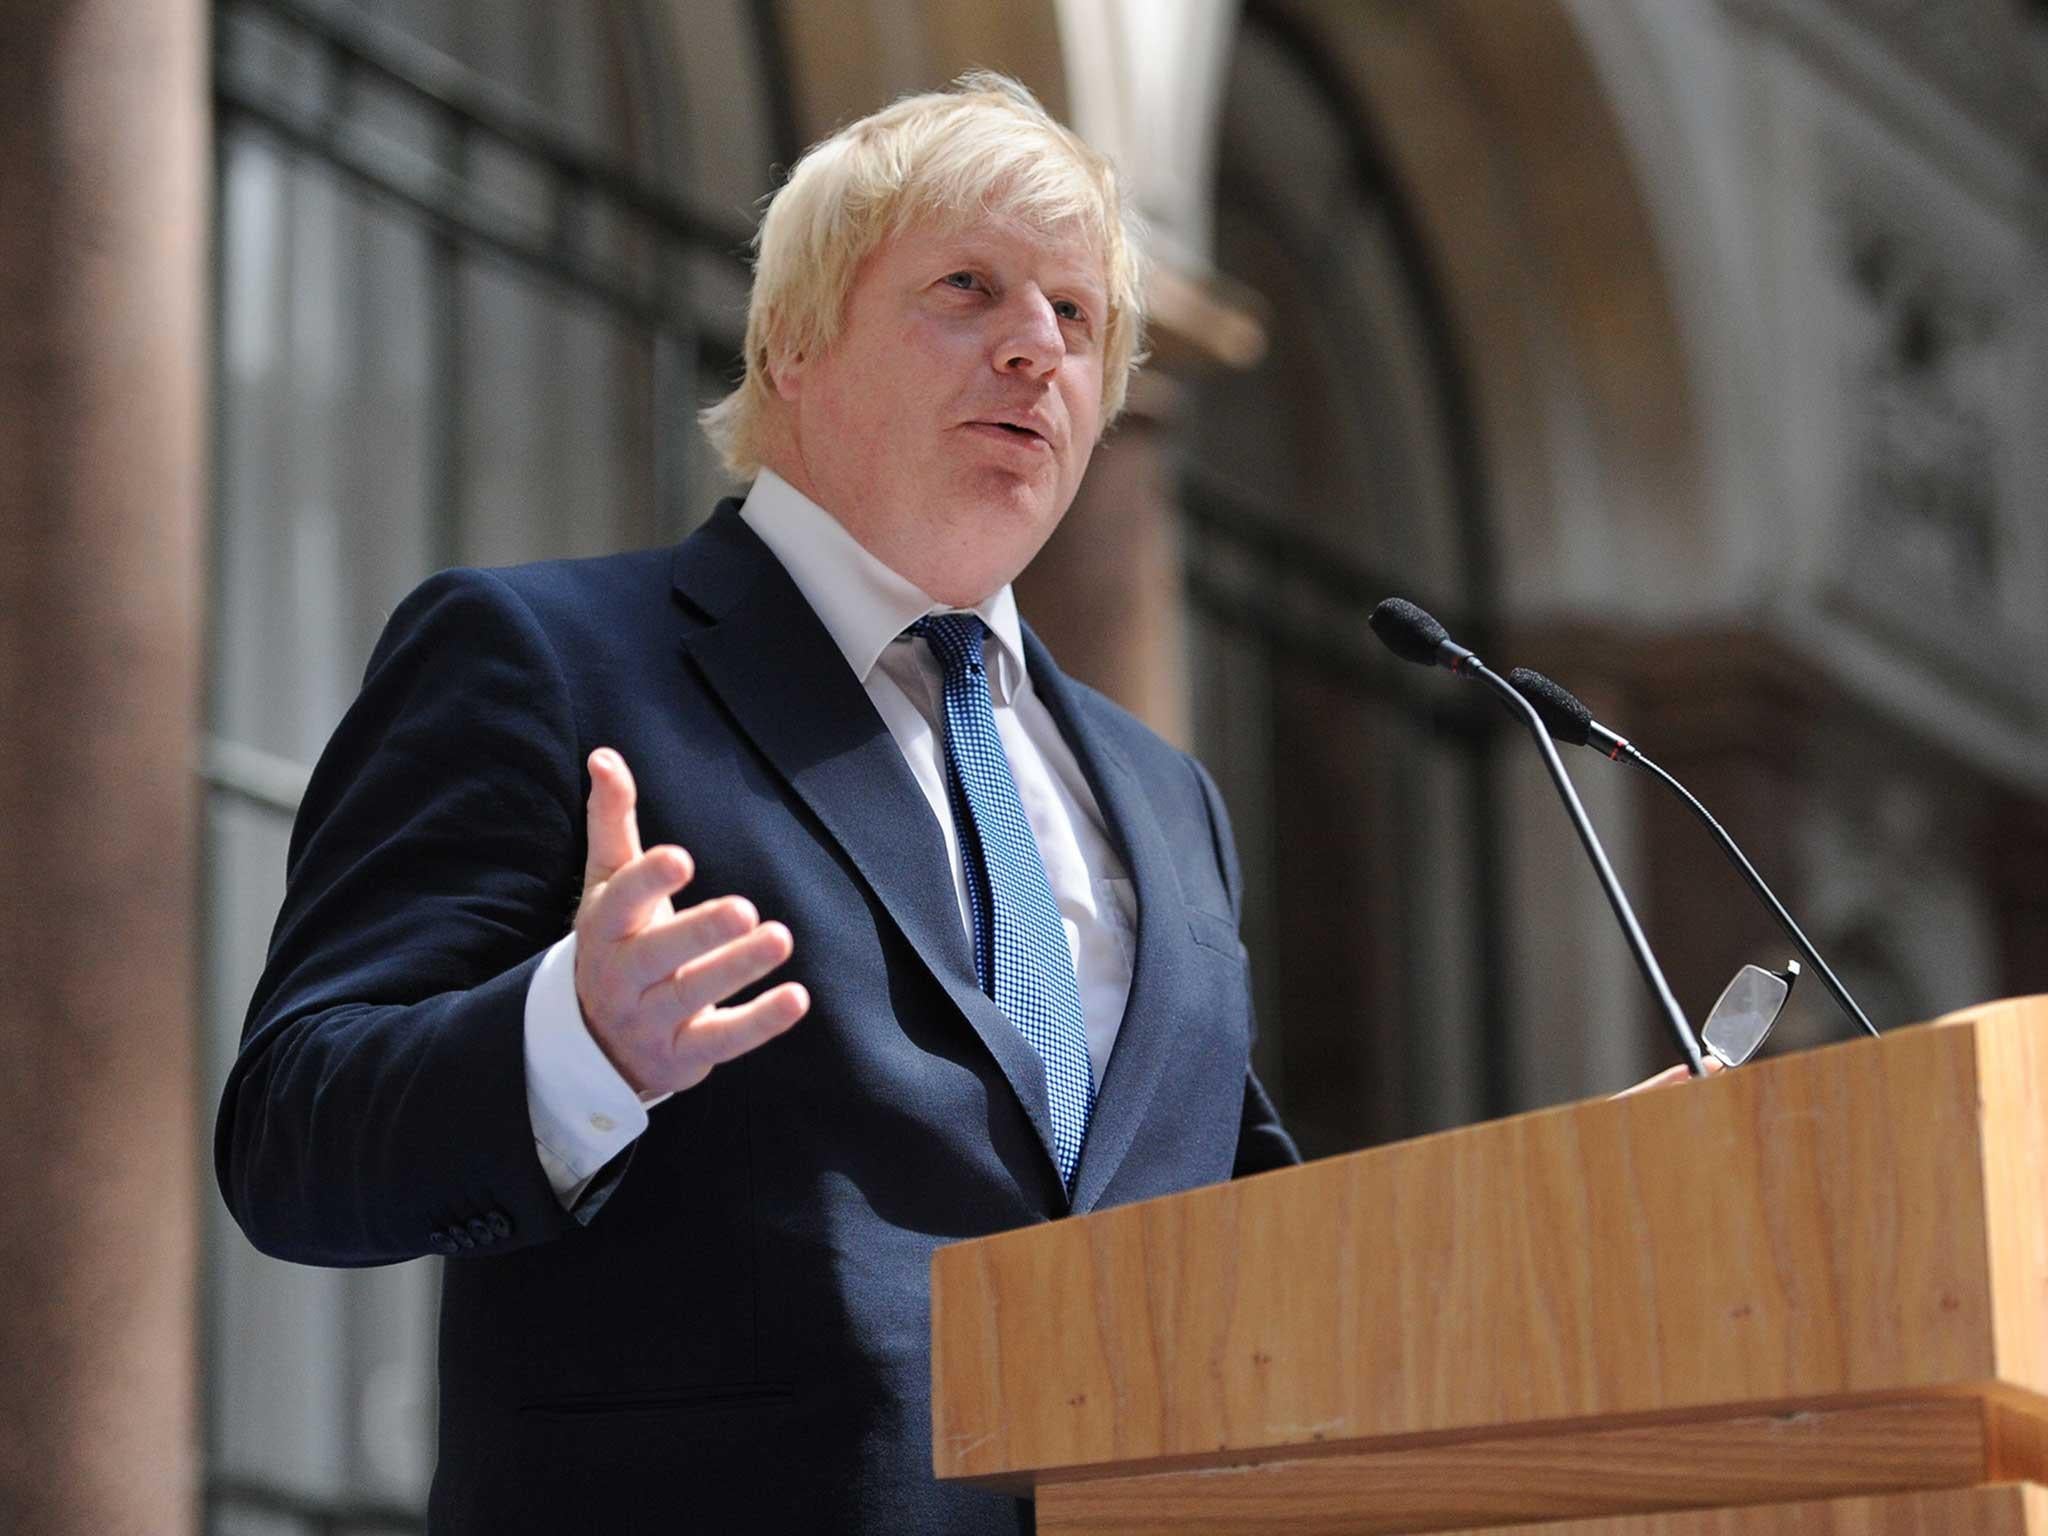 Boris Johnson and other senior Brexiteers have recently been slapped down by the PM for going off-piste with remarks on the single market